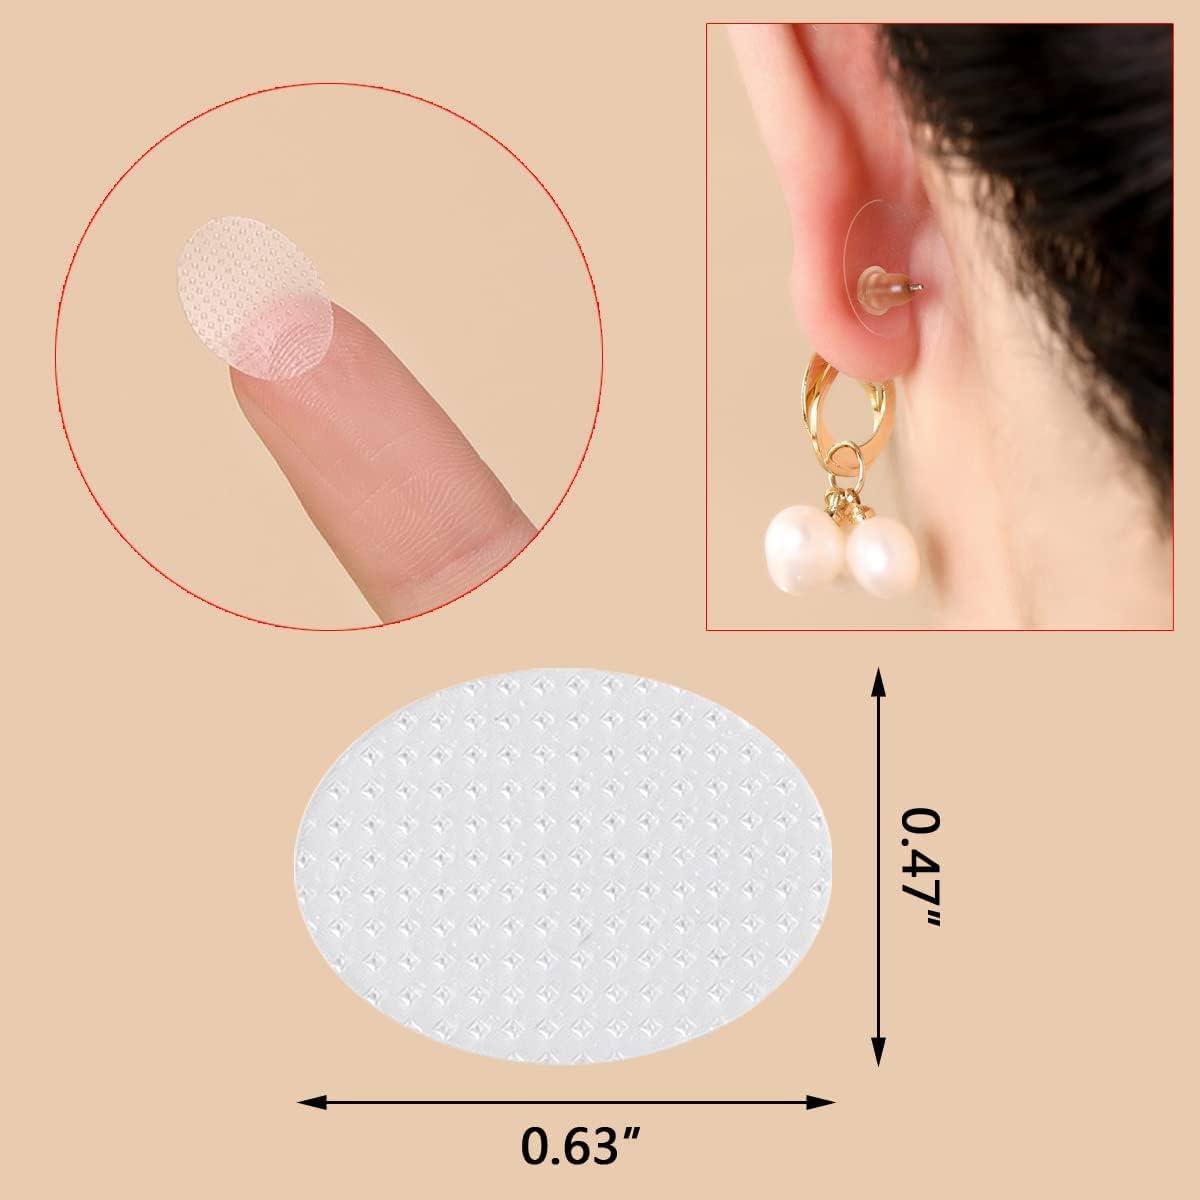 1 Pair Gold Filled Earring Lifter Earlobe Support for Heavy Earring  Adjustable Hypoallergenic Earring Back Lifter for Earring Supplies , Heavy  Earring Support Backs - valleyresorts.co.uk